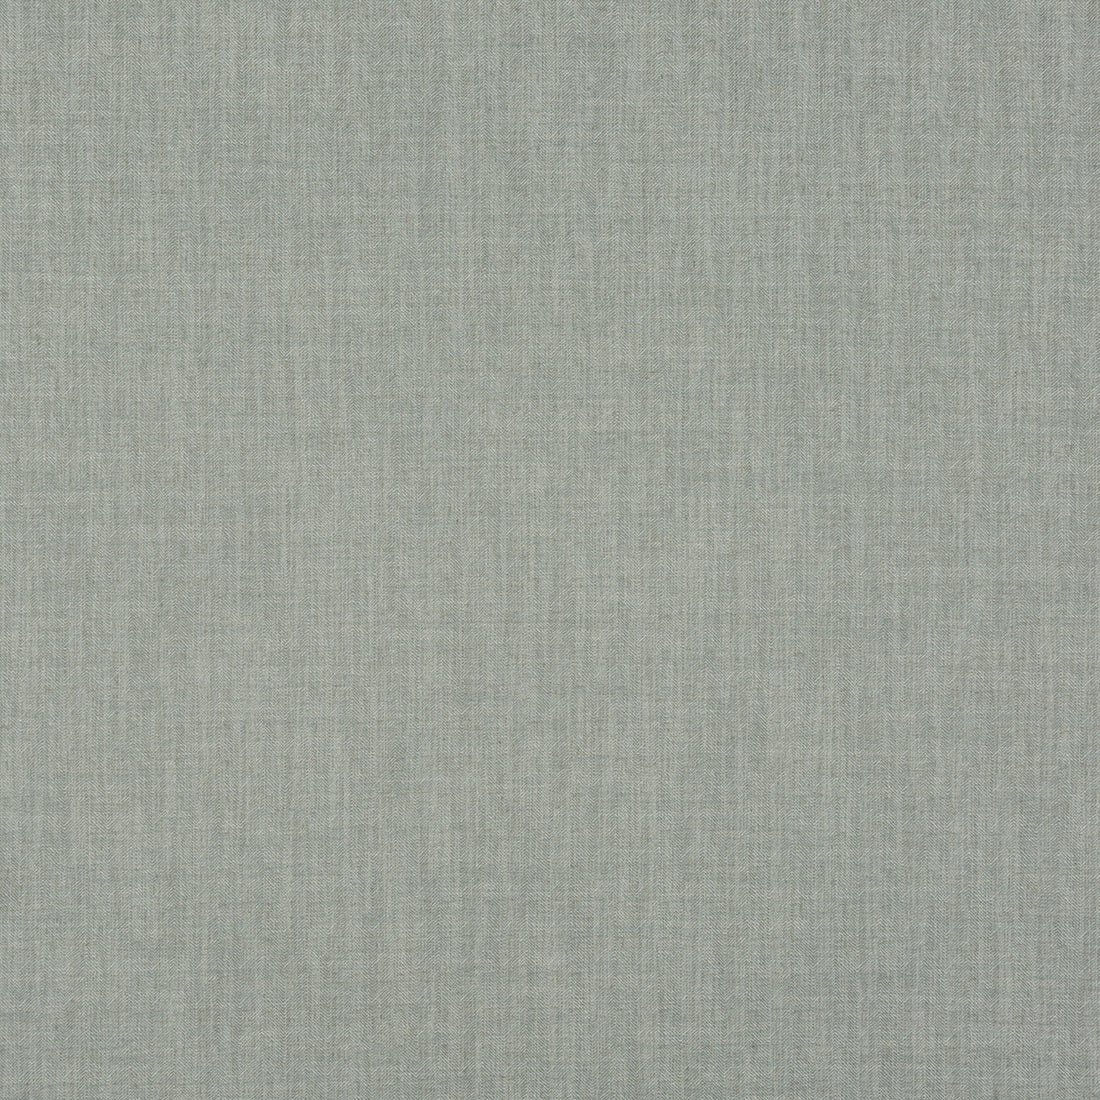 Canyon fabric in sea foam color - pattern BF10680.721.0 - by G P &amp; J Baker in the Essential Colours collection